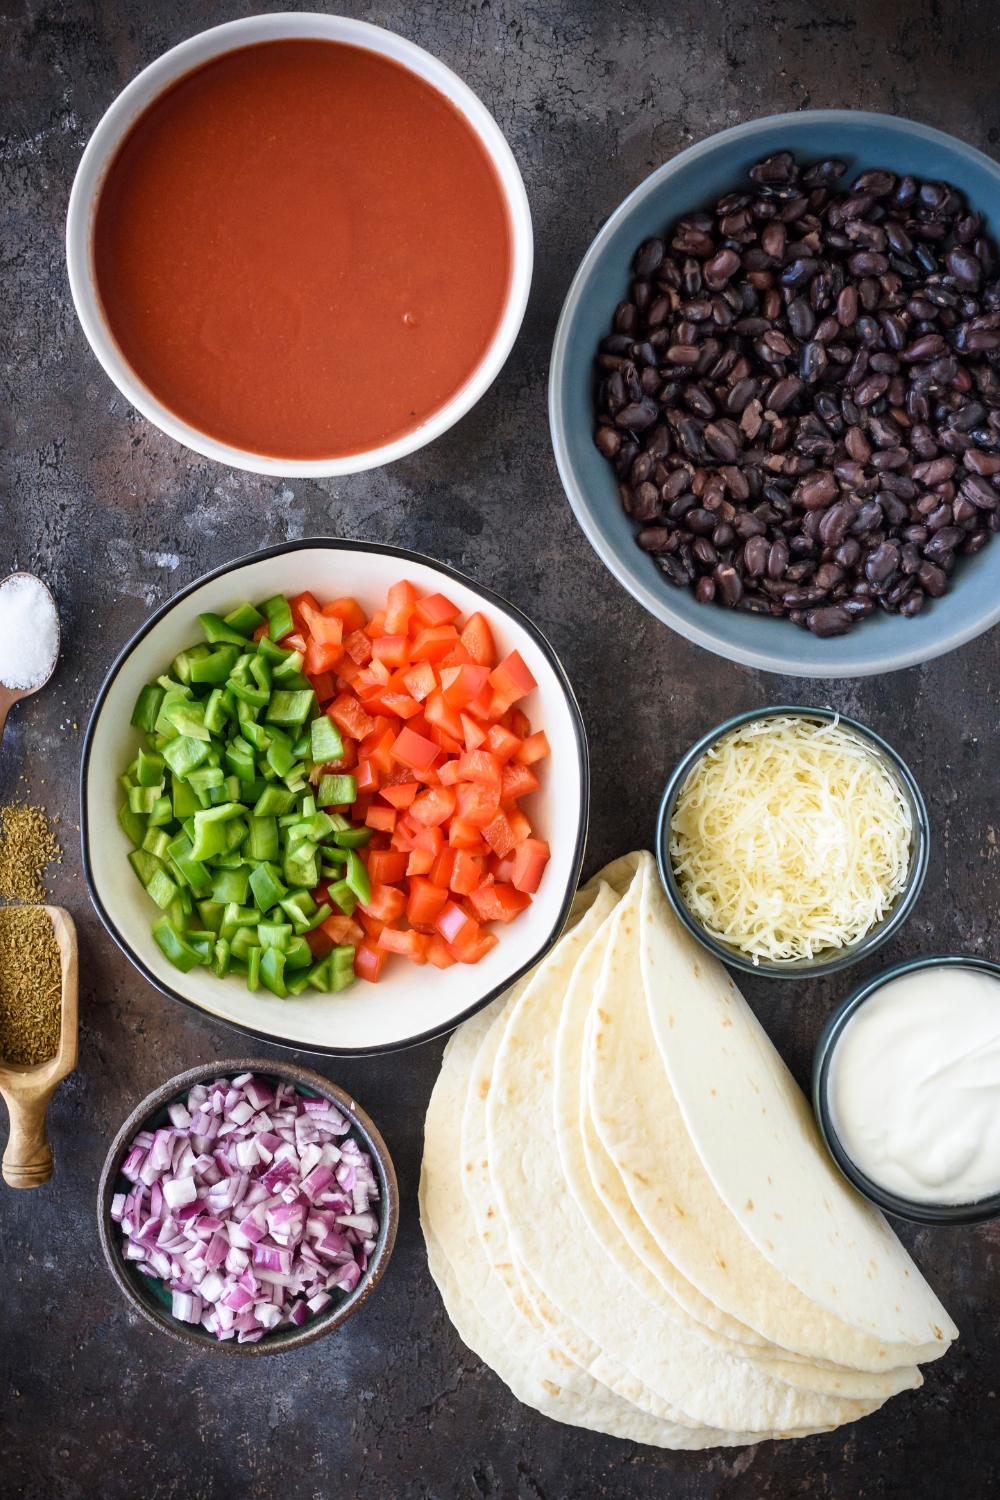 A countertop with multiple bowls with separate ingredients like peppers, onions, beans, cheese, sour cream, enchilada sauce, and flour tortillas.